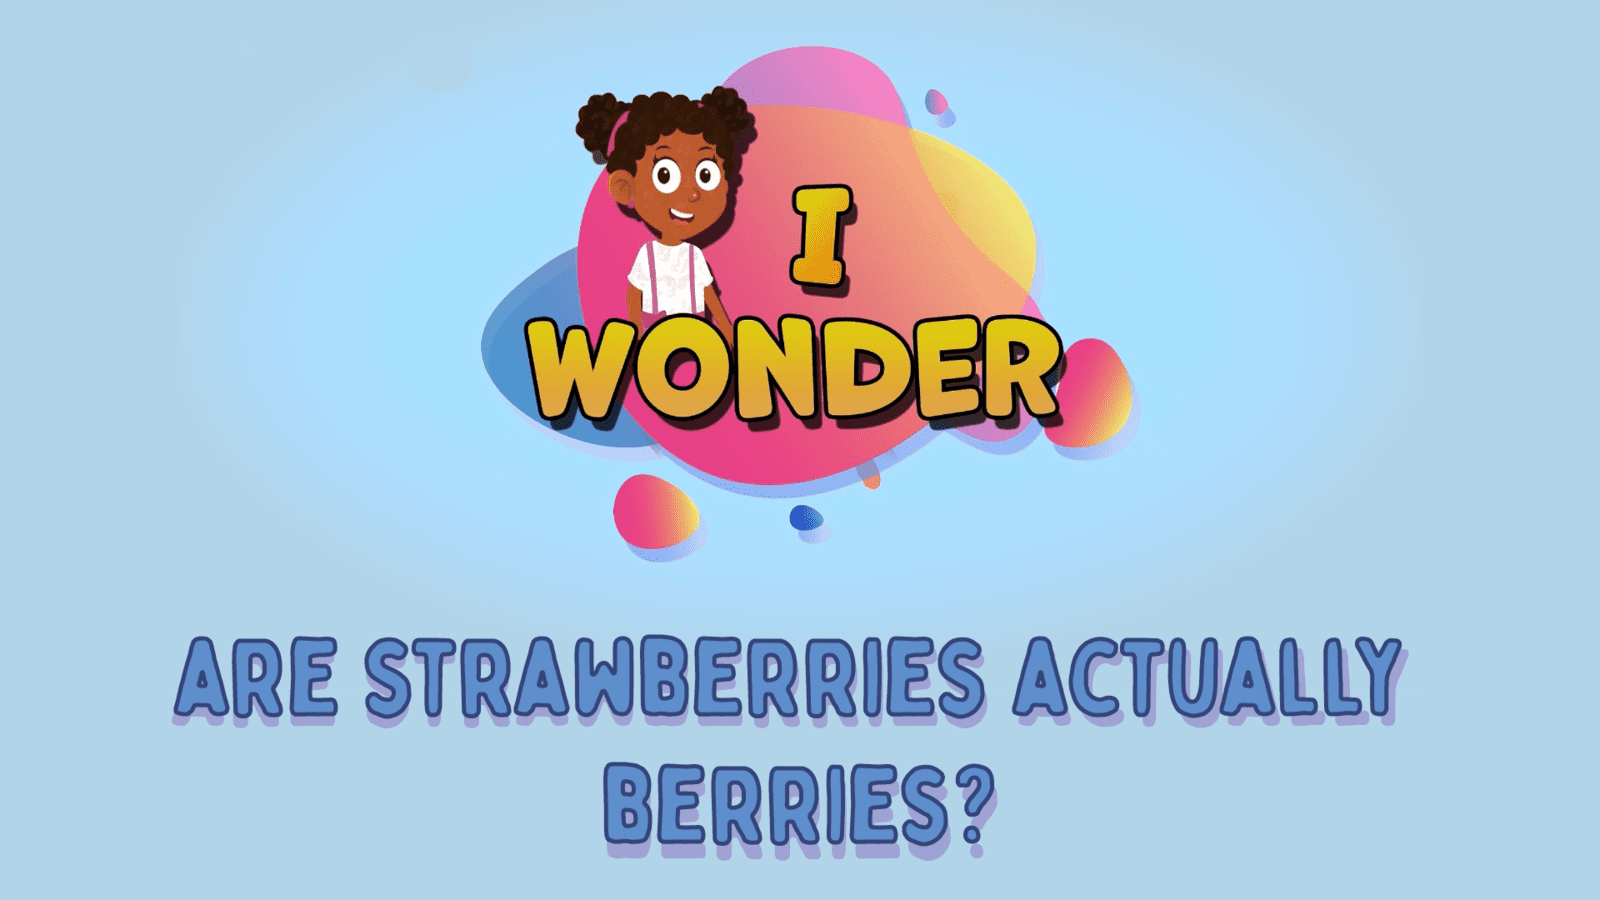 Are Strawberries Actually Berries?